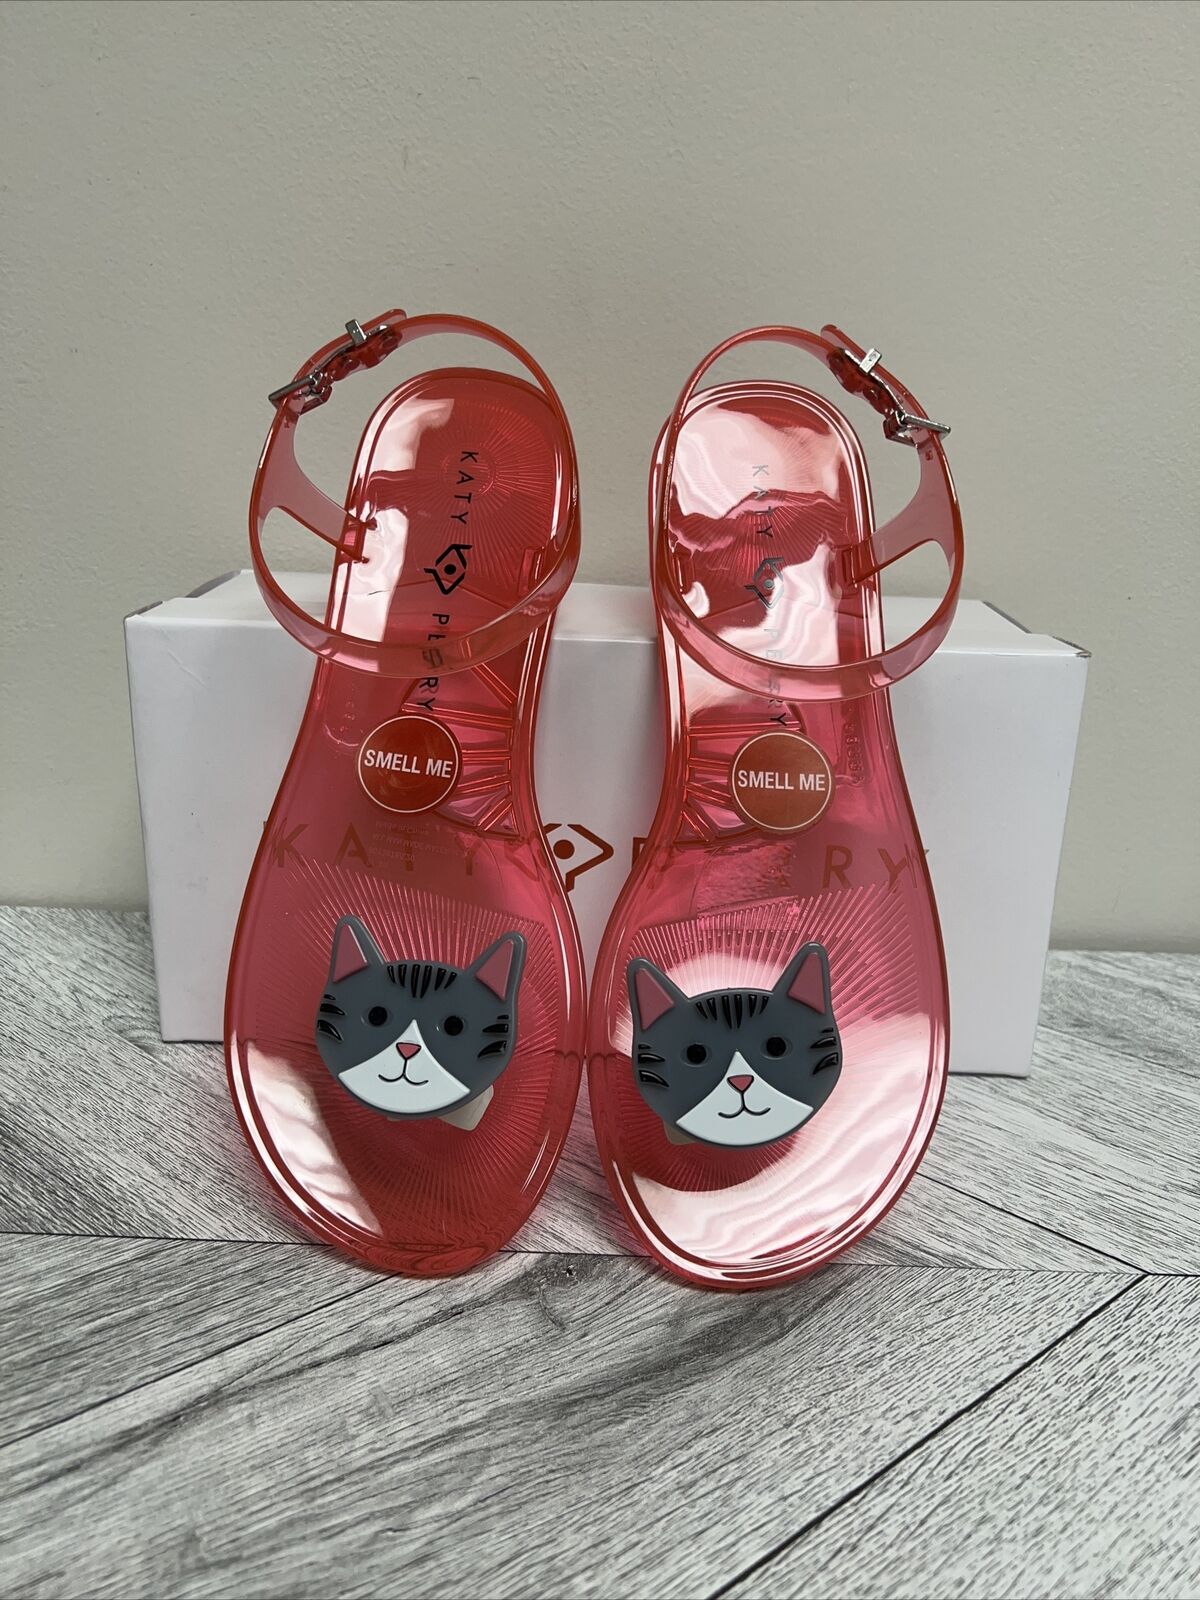 katy perry fruit jelly sandals, Off 73%, www.iusarecords.com